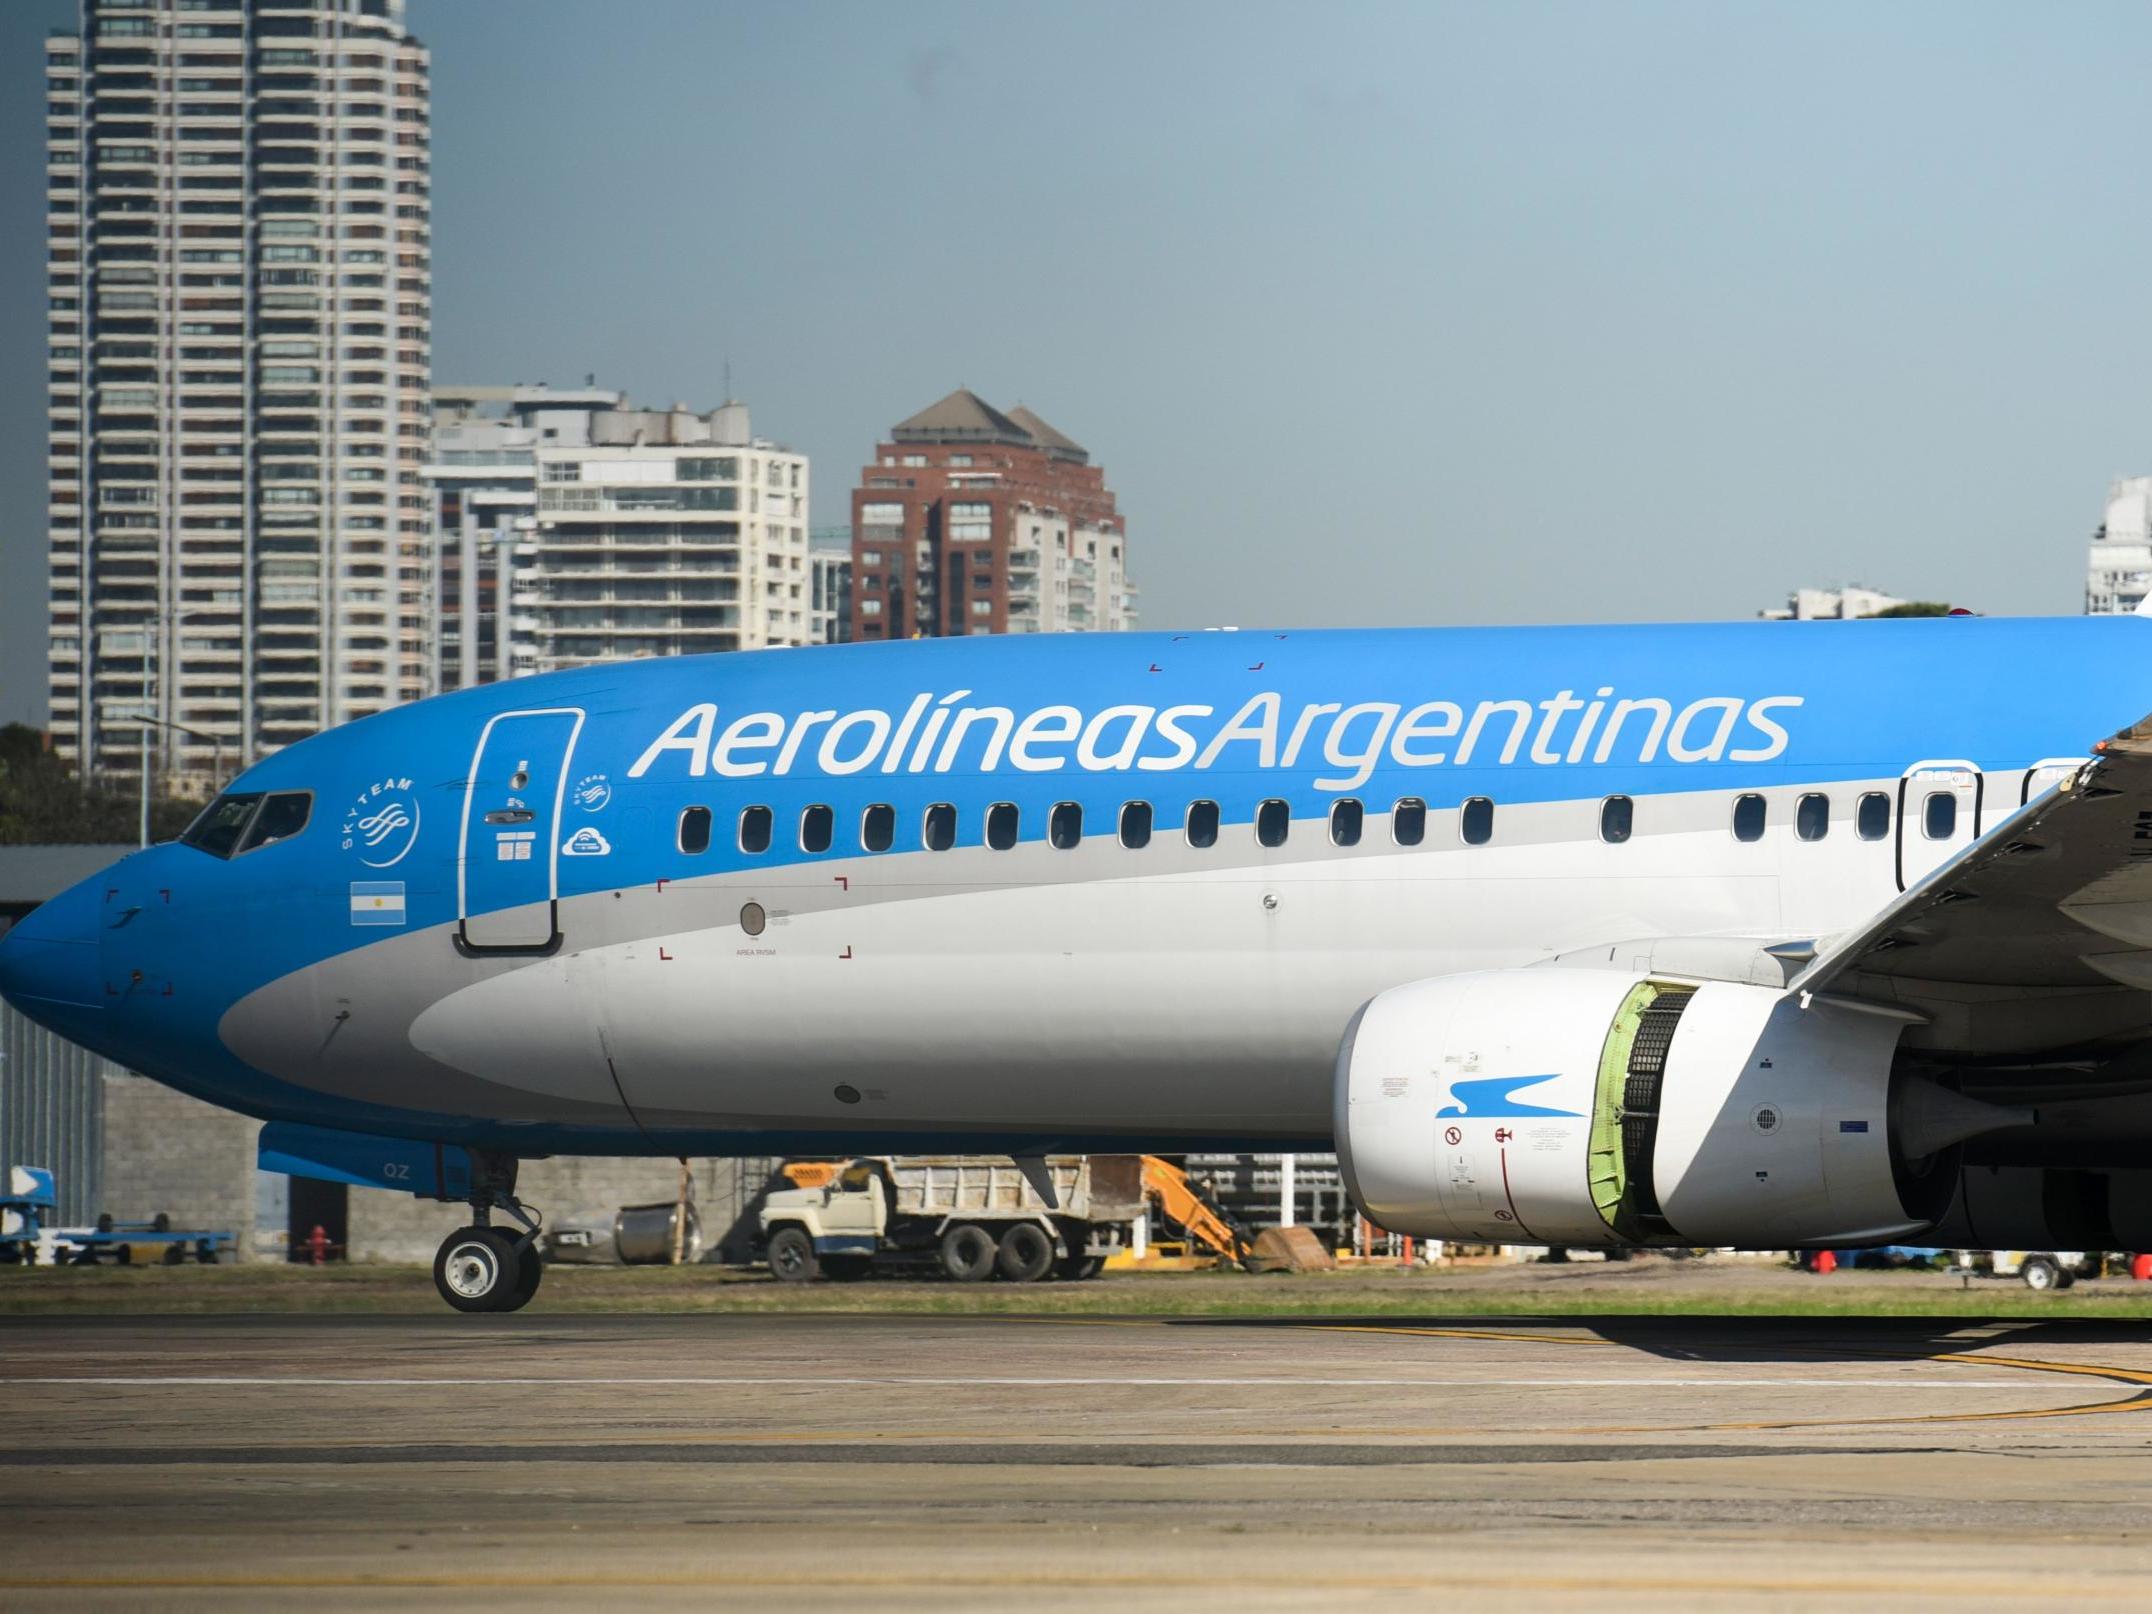 Argentina has banned all commercial flights until September